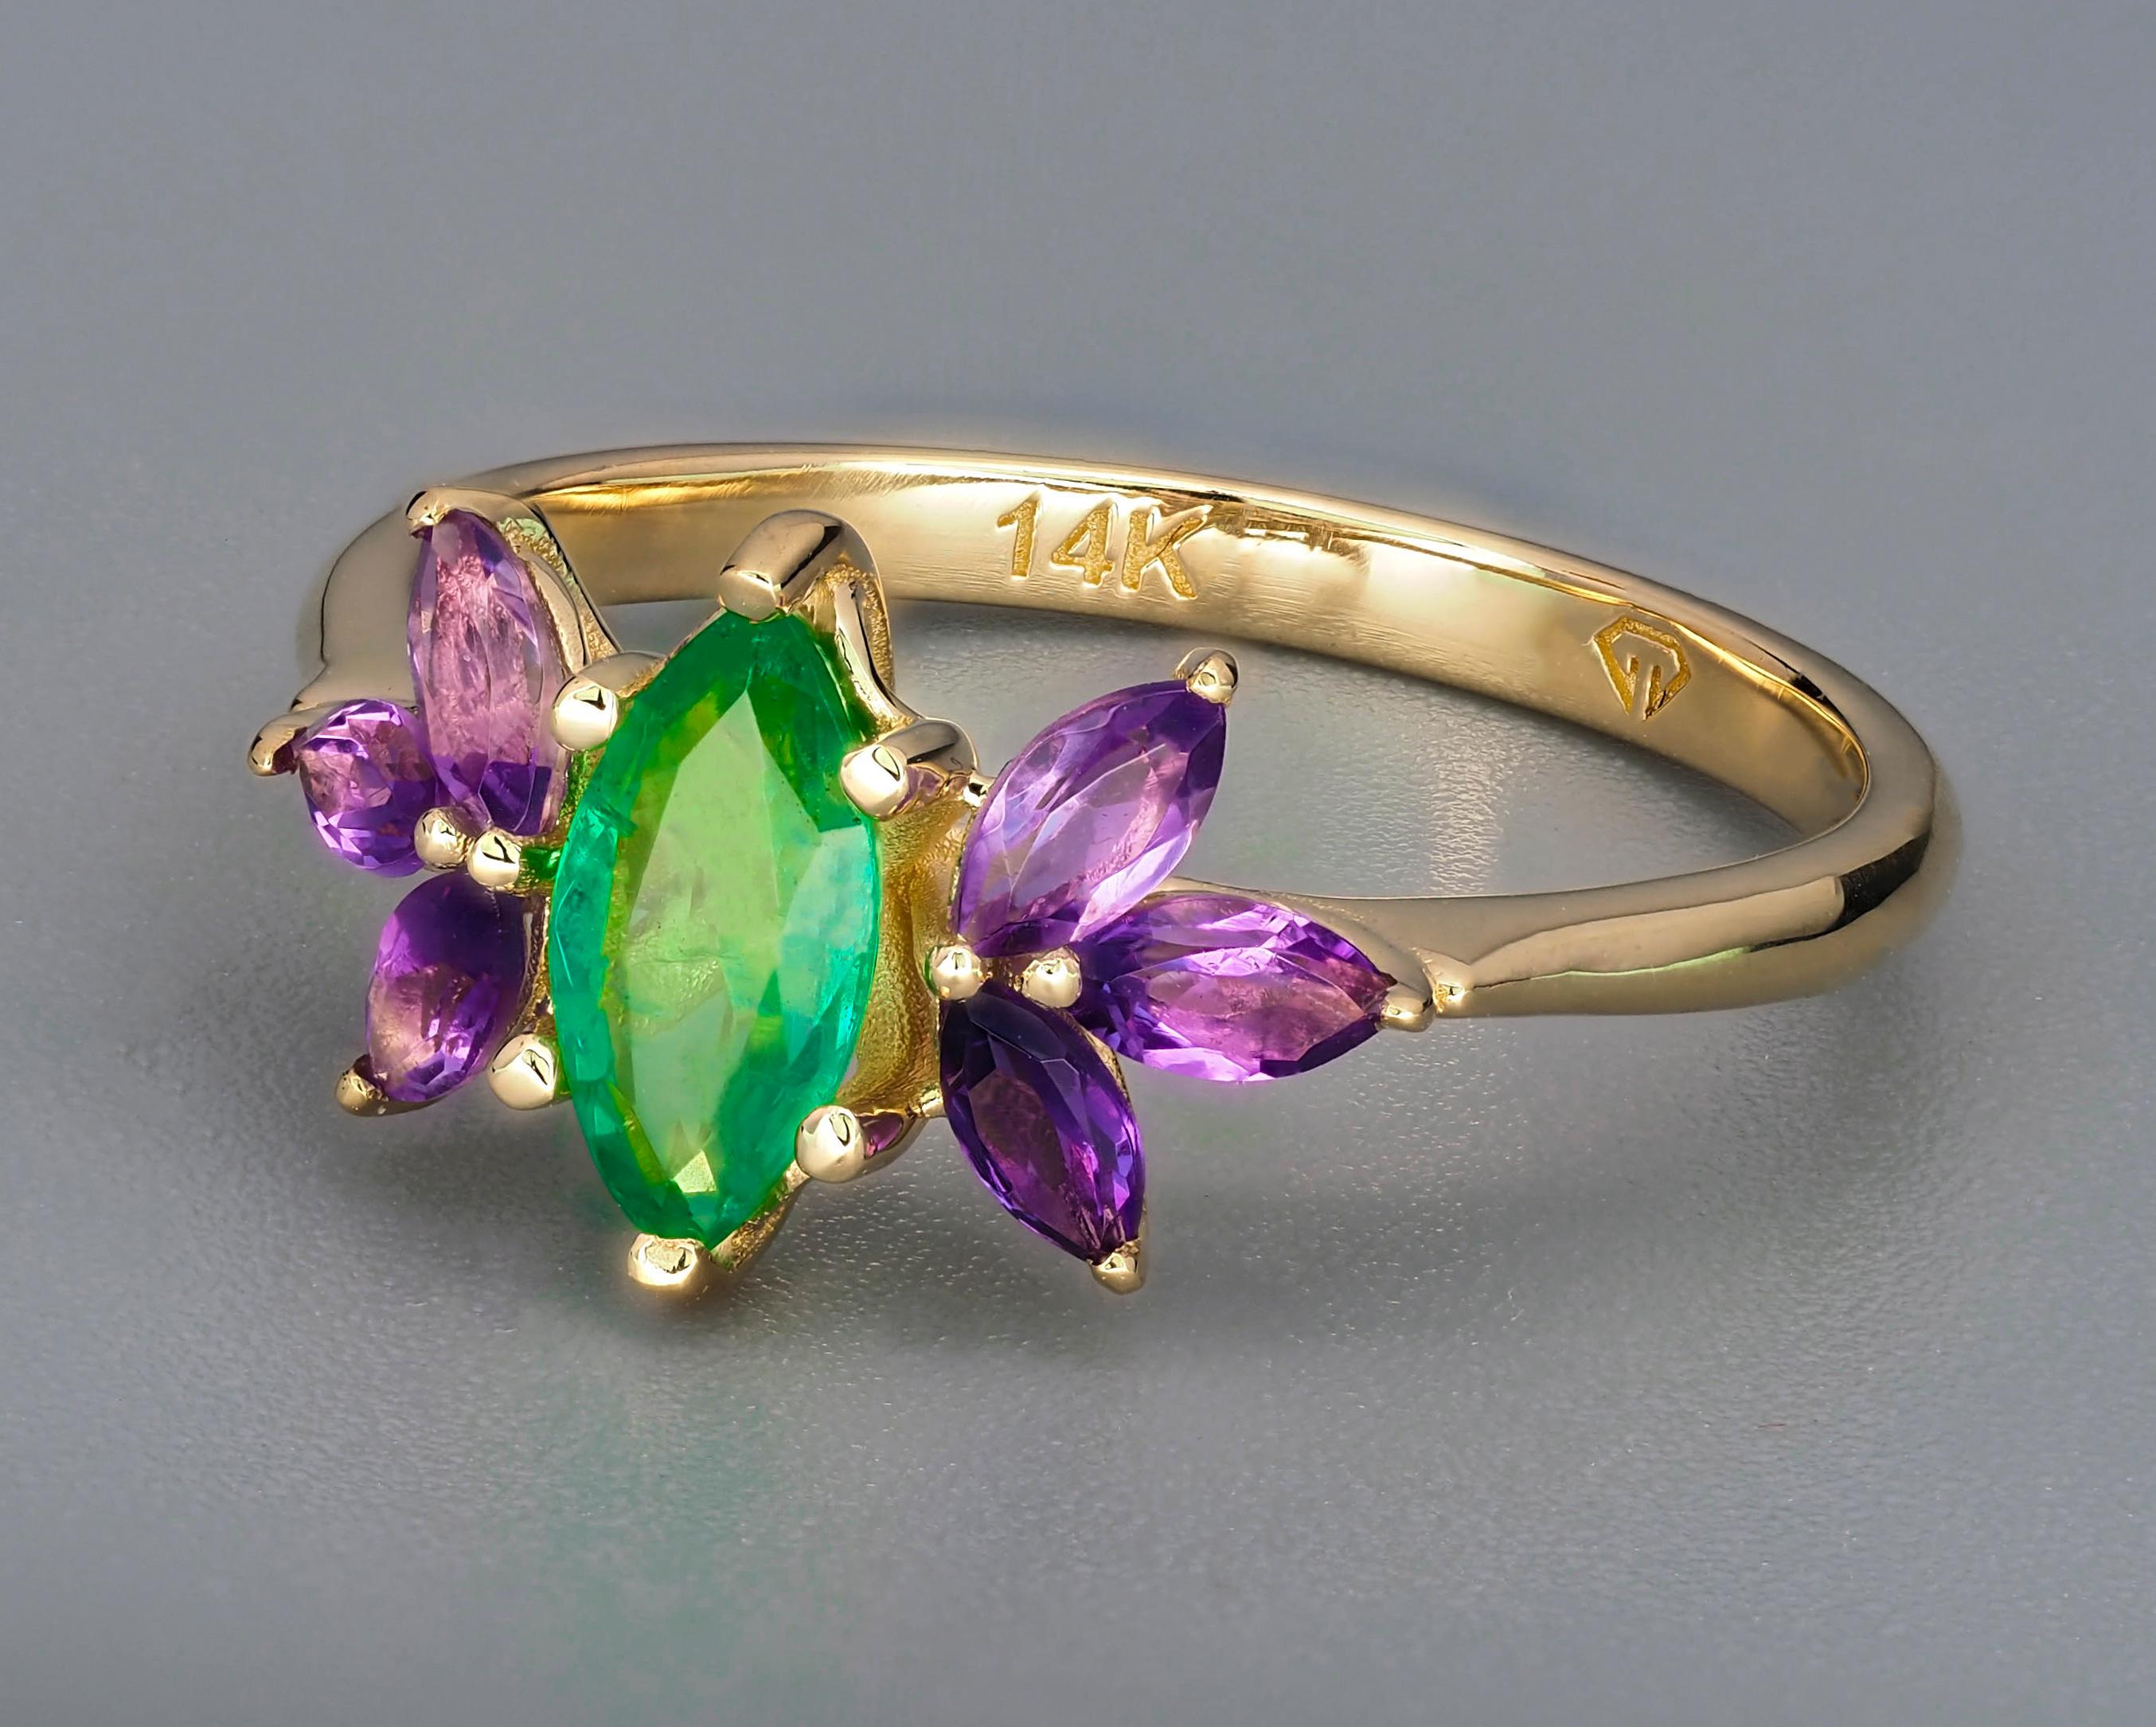 For Sale:  Emerald gold ring. 14k Gold Ring with Marquise Emerald and Amethysts.  6